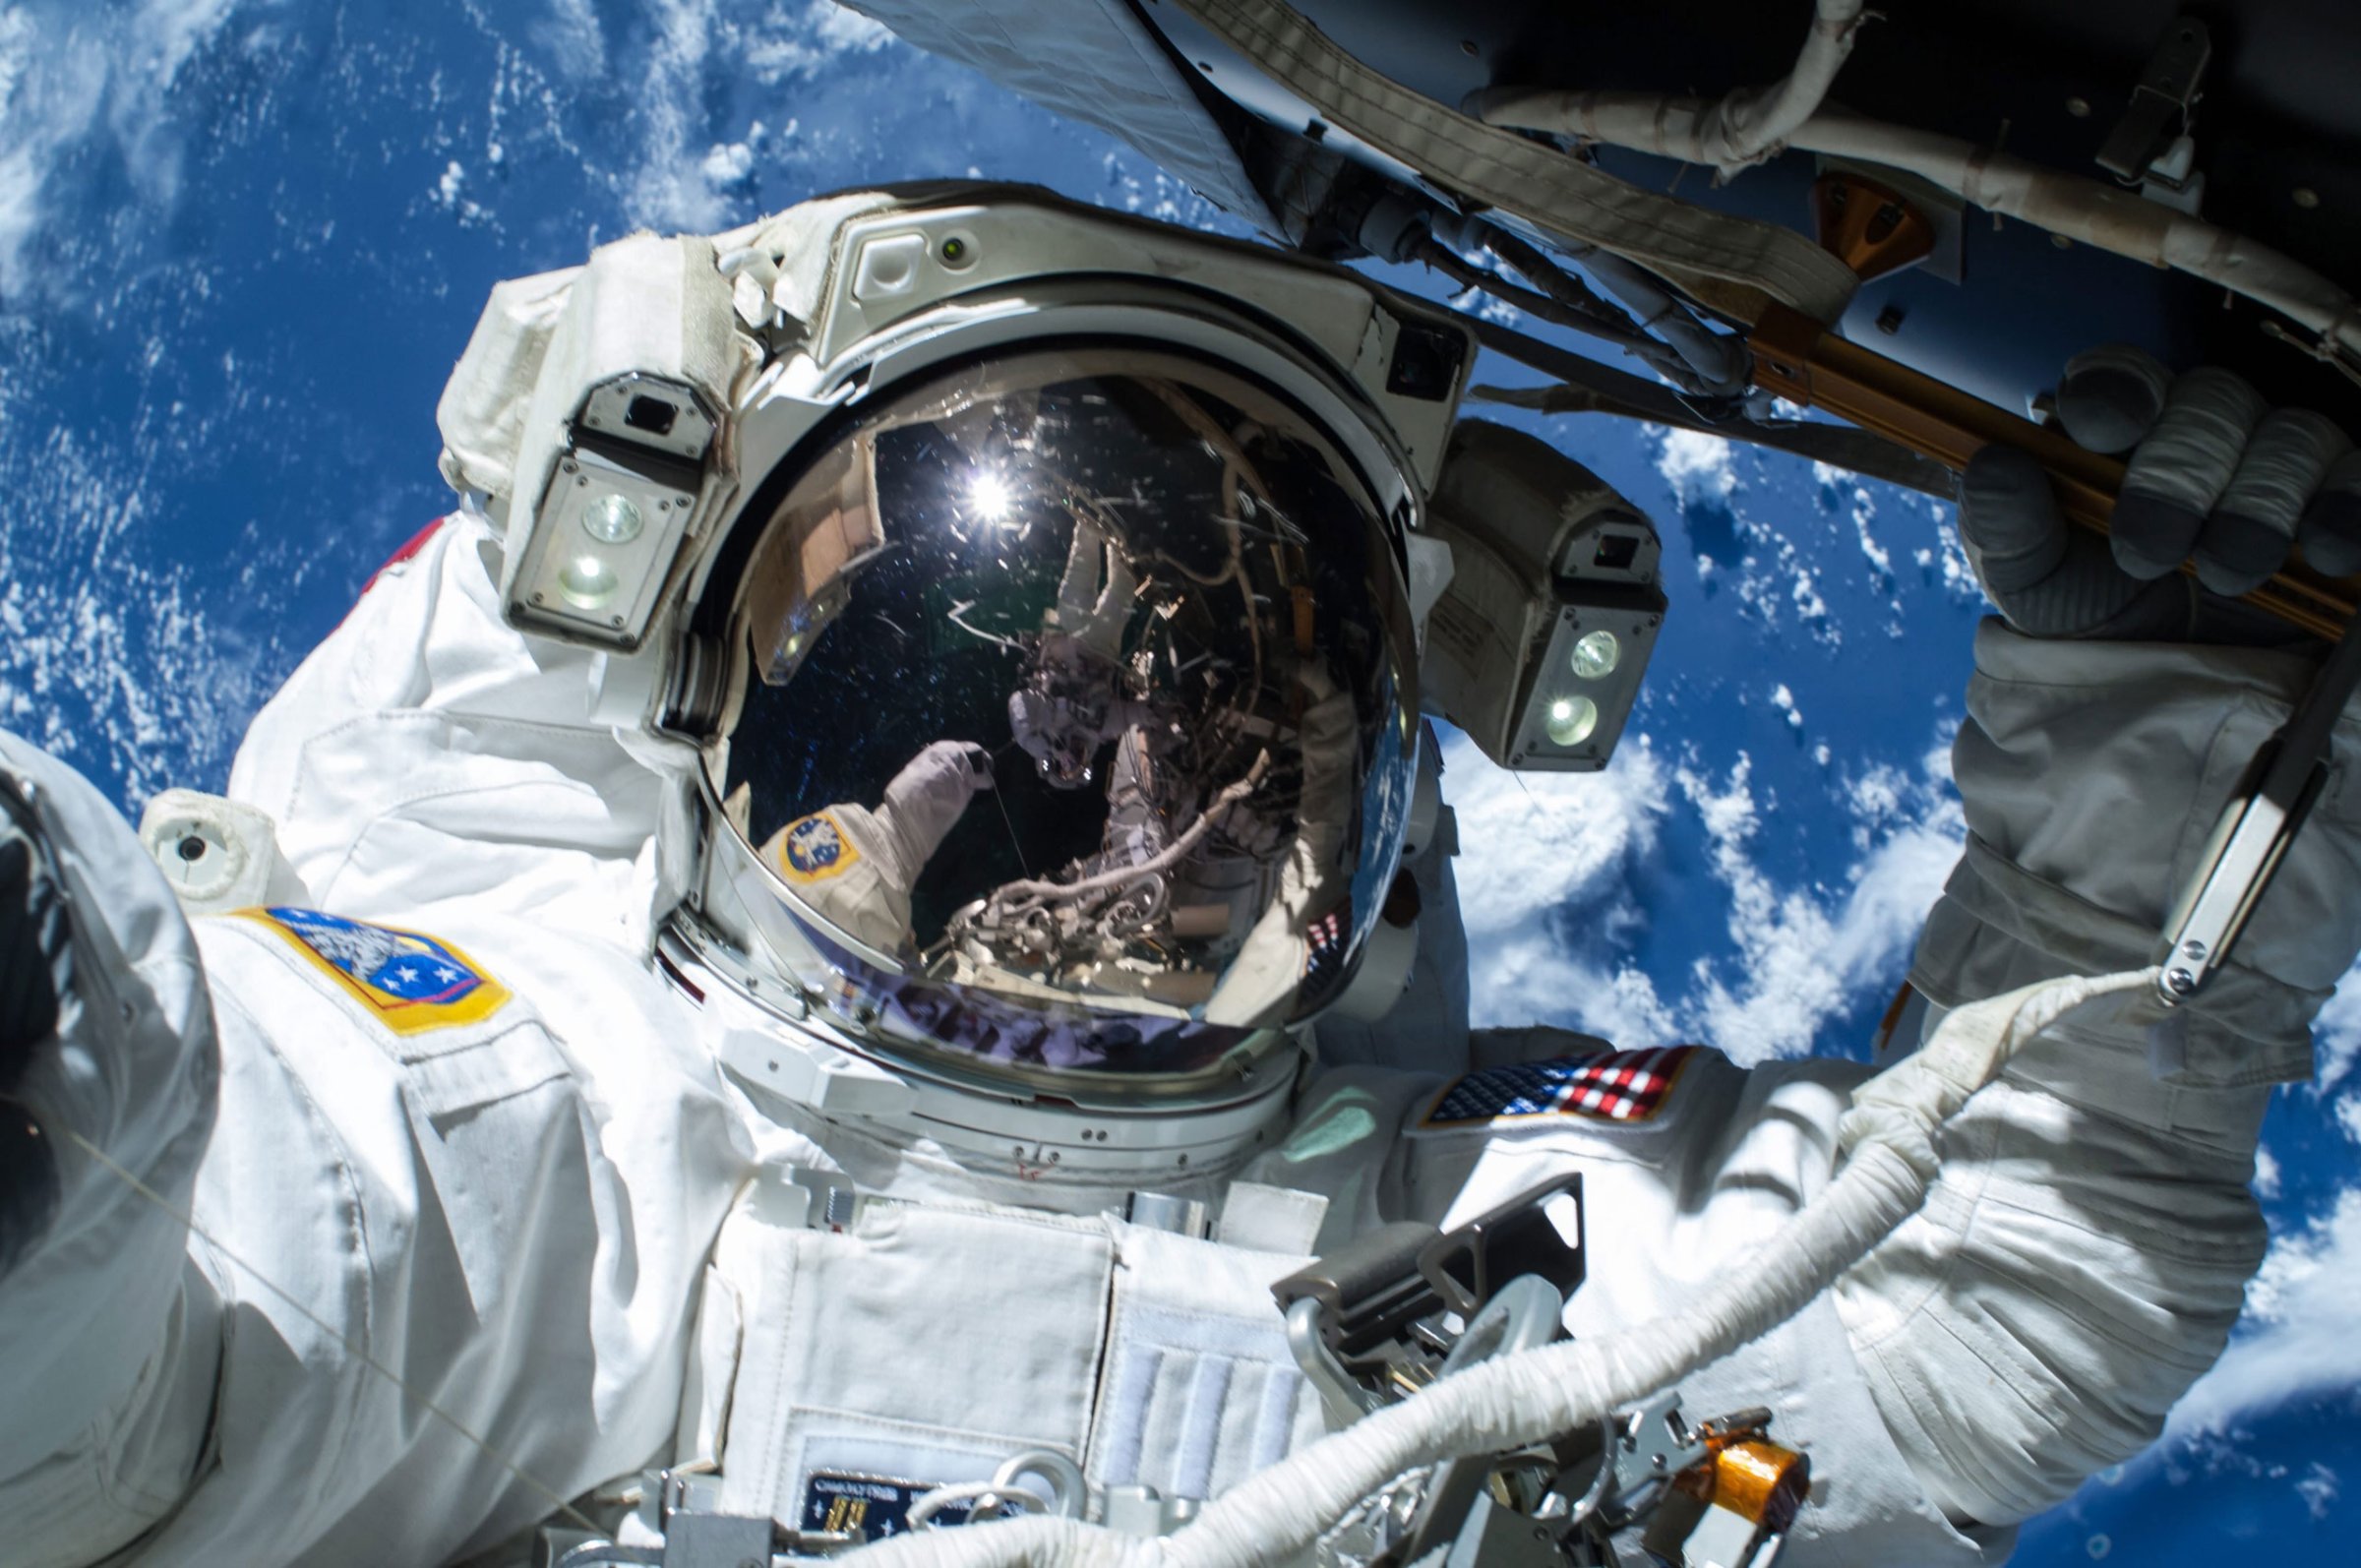 NASA astronaut Barry Wilmore operating outside the International Space Station (ISS) on the first of three spacewalks preparing the station for future arrivals by US commercial crew spacecraft, in space, 21 Feb. 21, 2015.